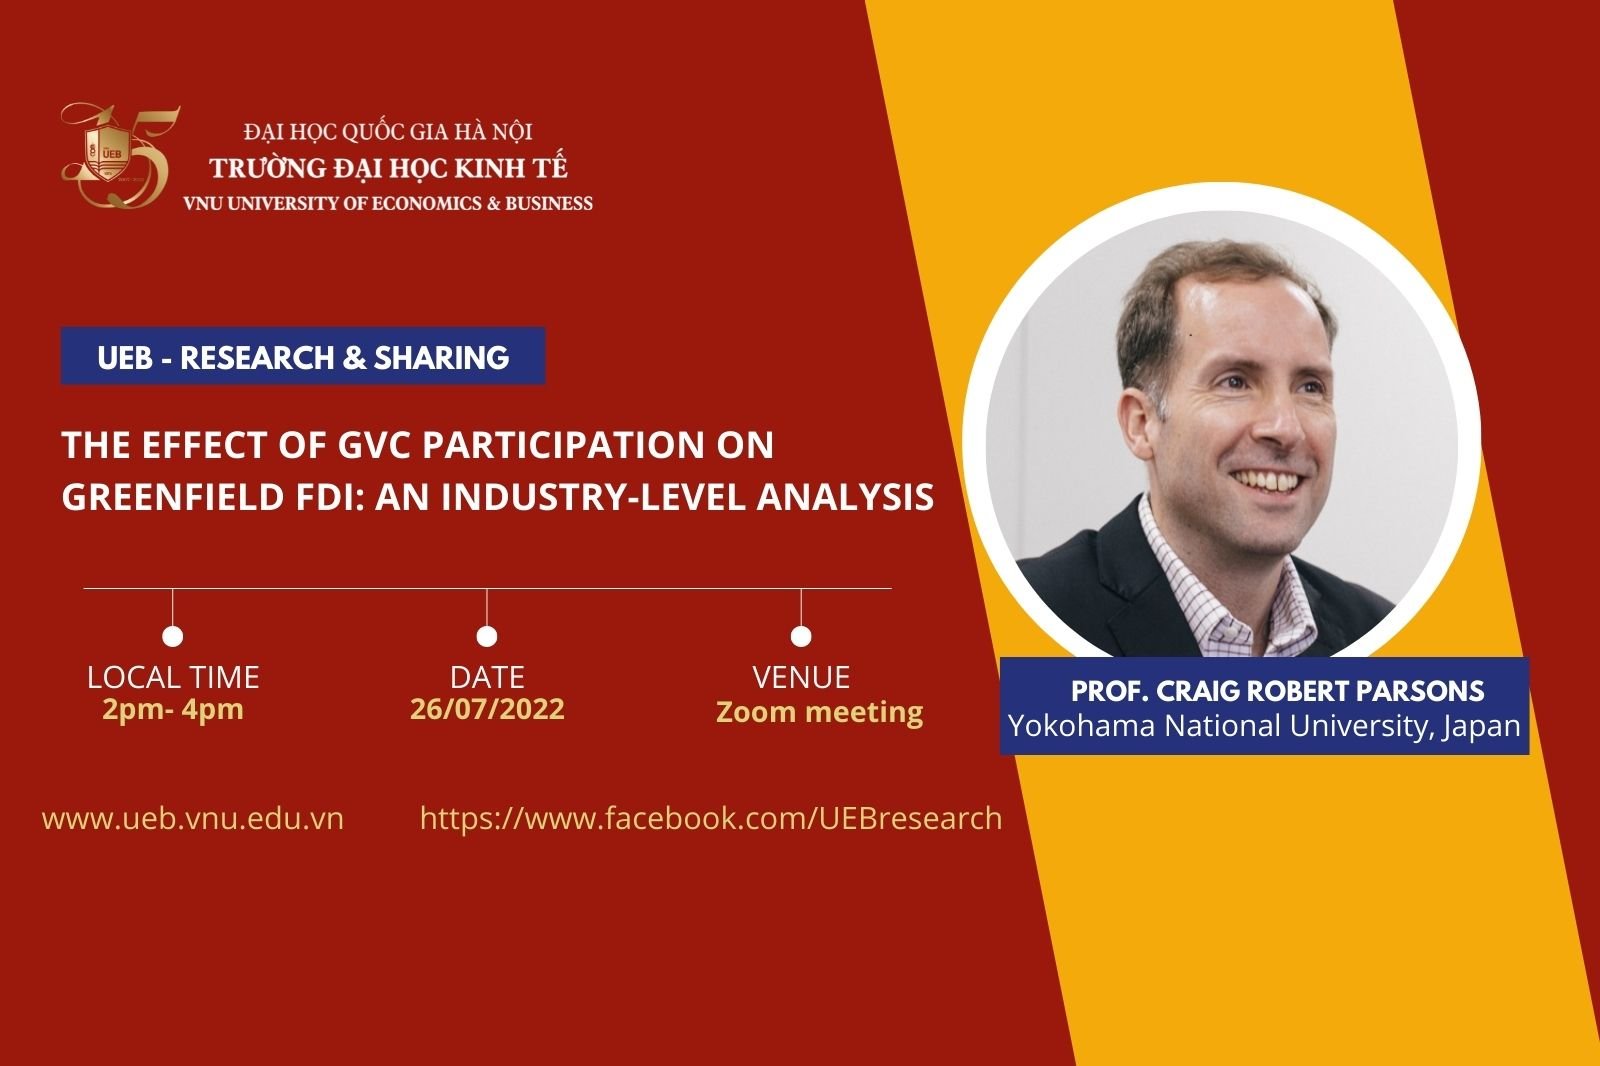 Webinar quốc tế “The Effect of GVC Participation on Greenfield FDI: An Industrial-level Analysis”